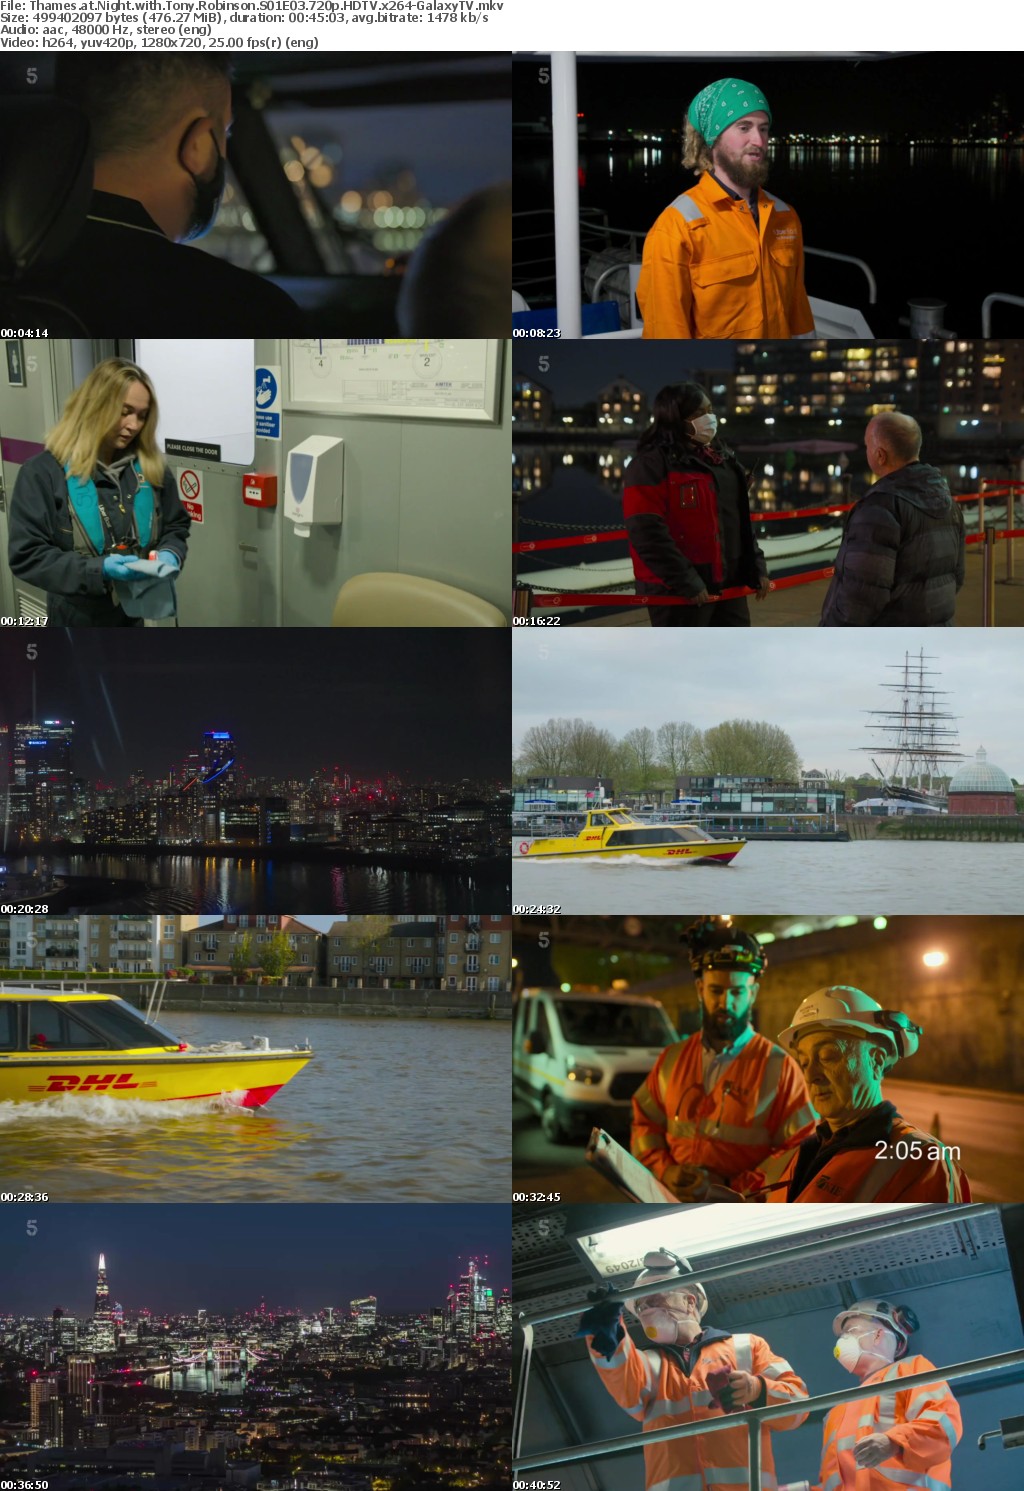 Thames At Night With Tony Robinson S01 COMPLETE 720p HDTV x264-GalaxyTV